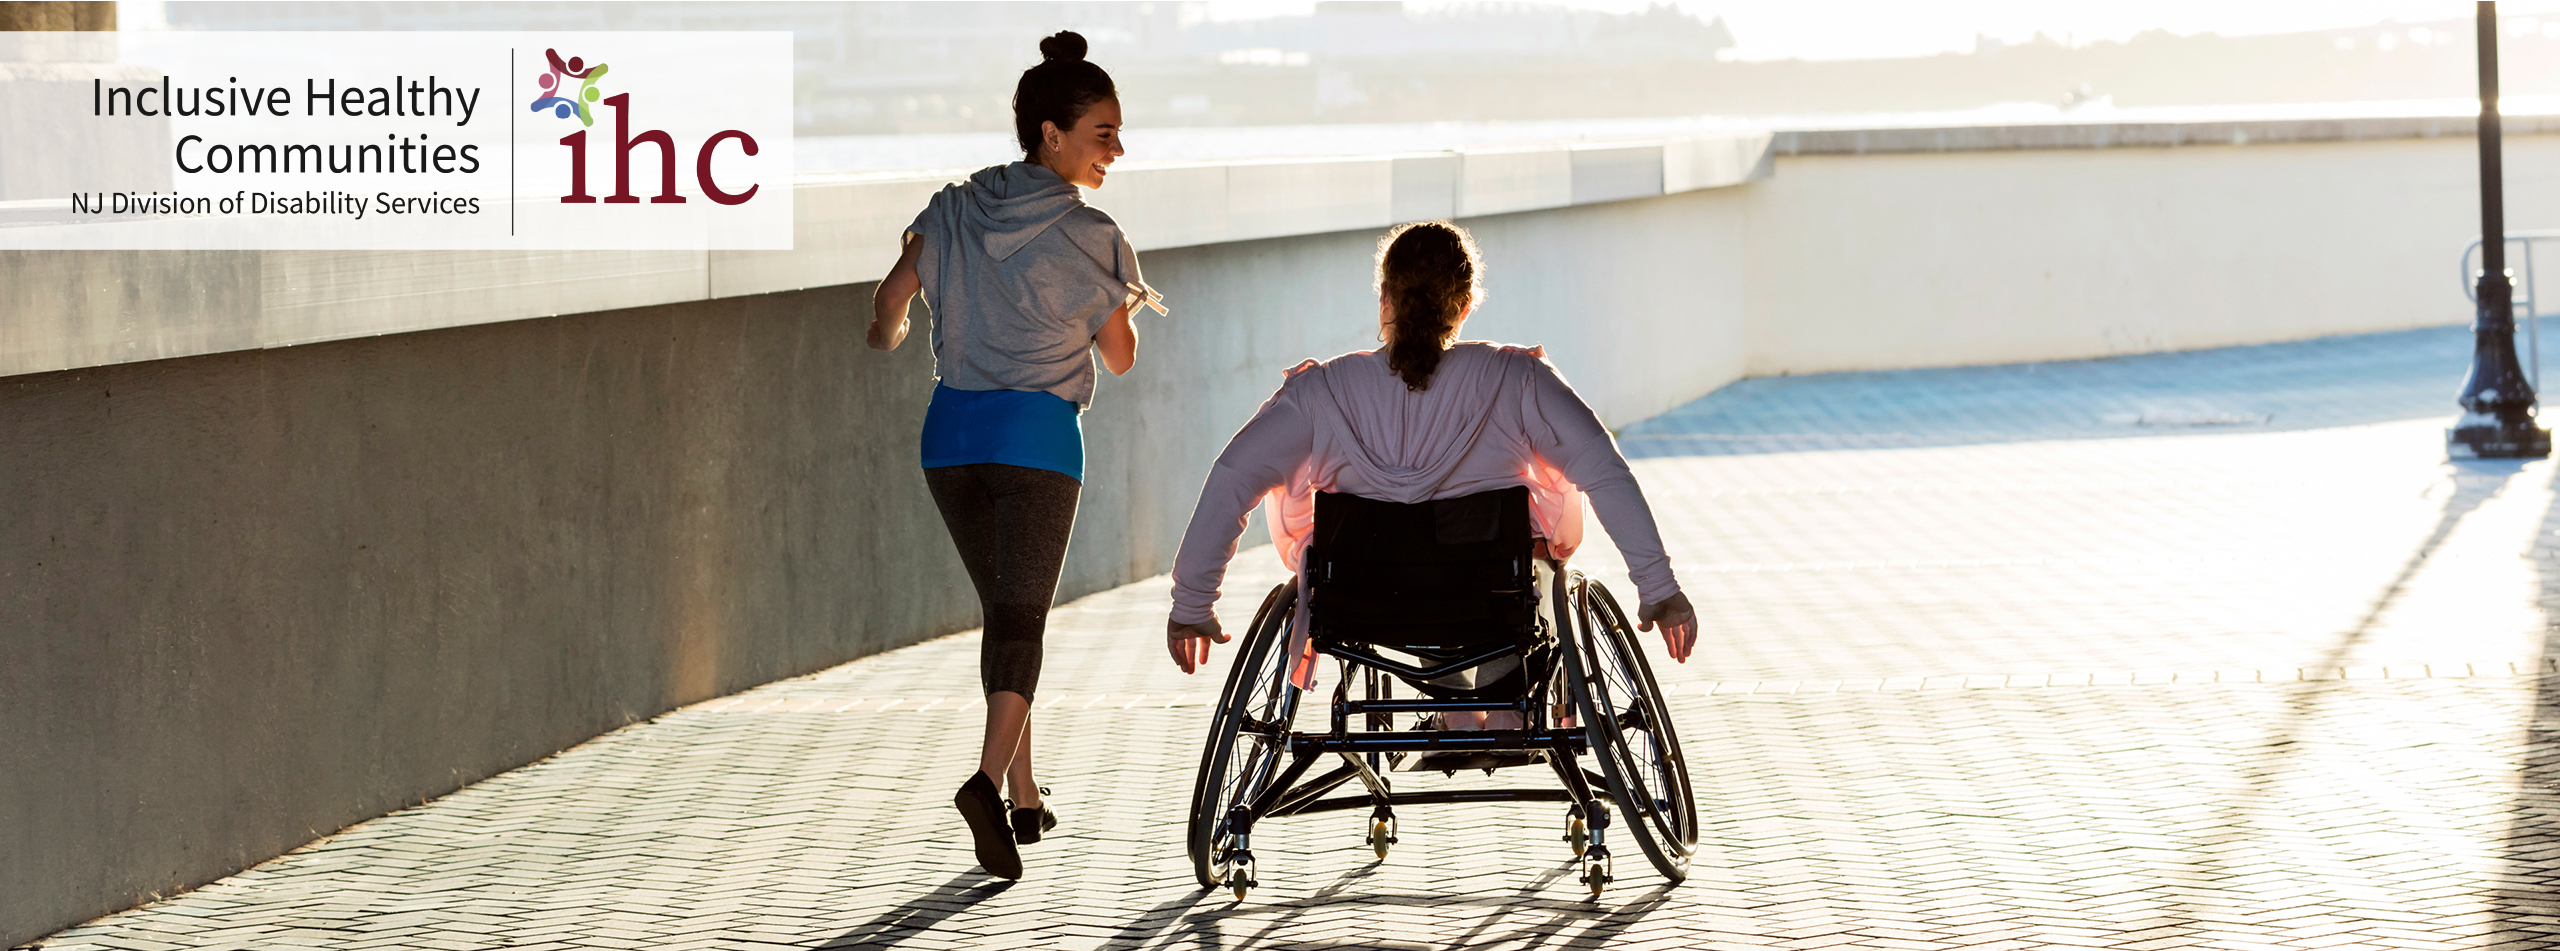 Woman running next to woman in wheelchair